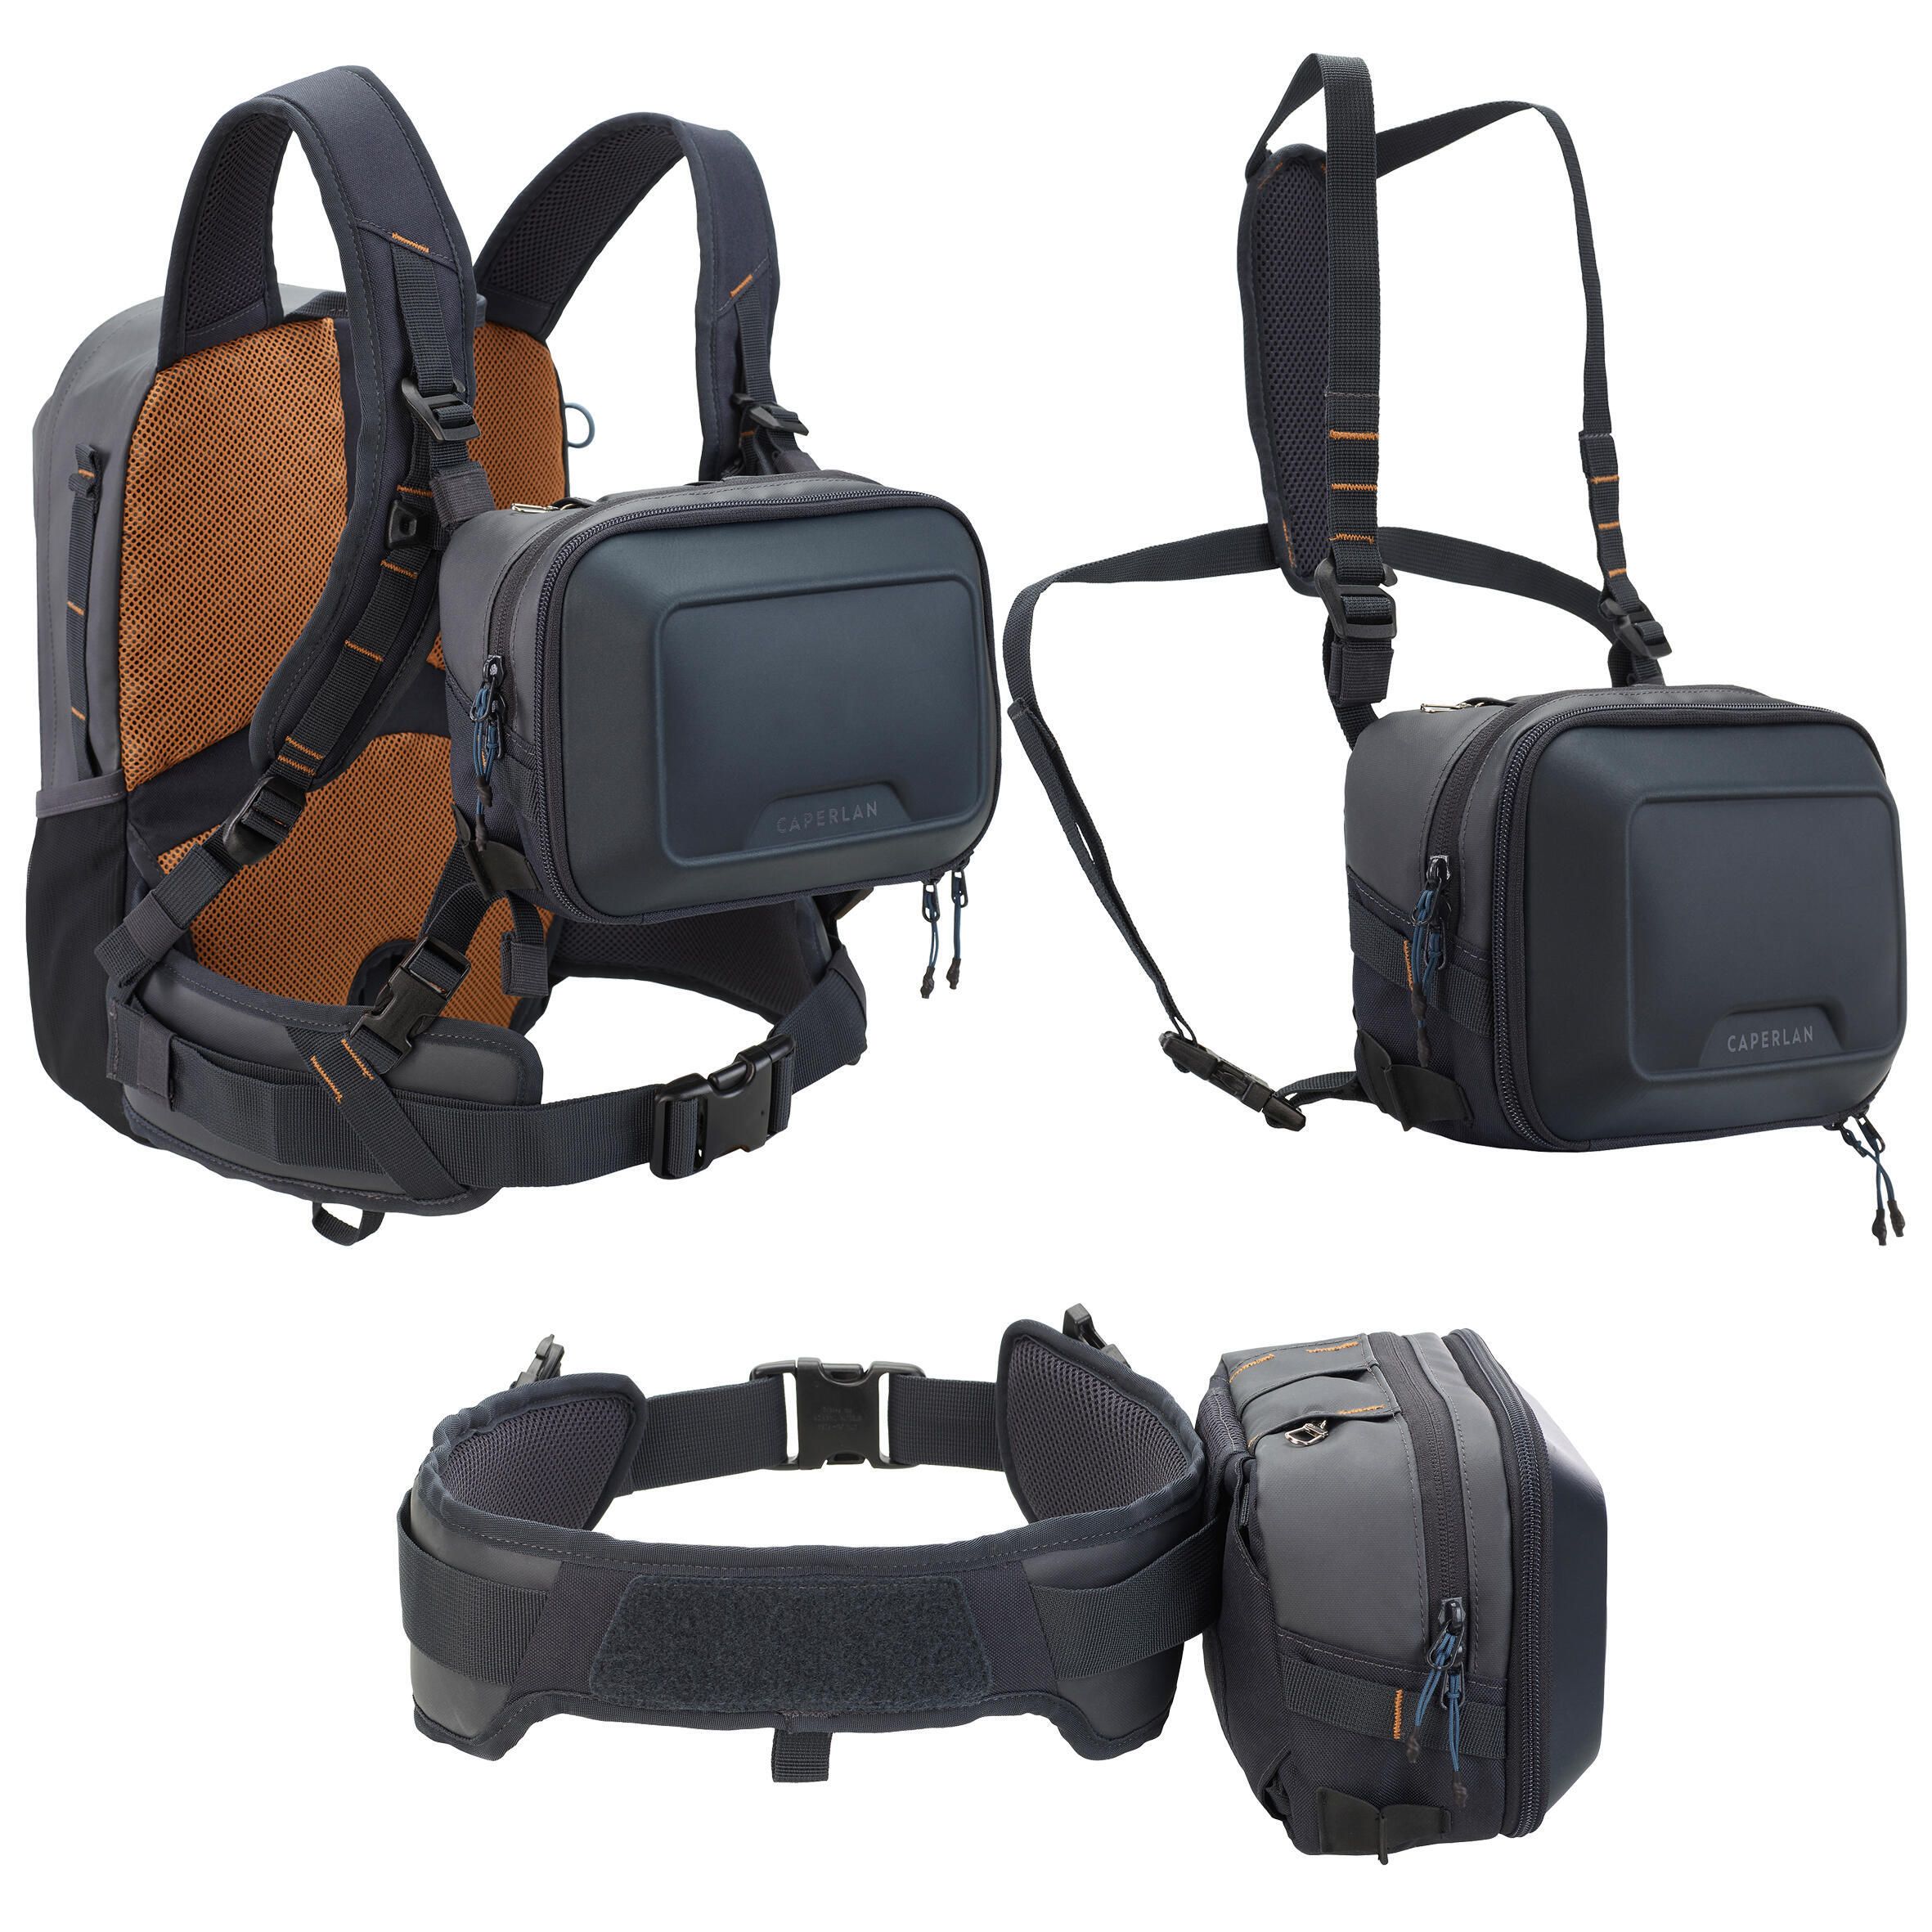 Fishing backpack Chest pack 500 15 L + 5 L CAPERLAN